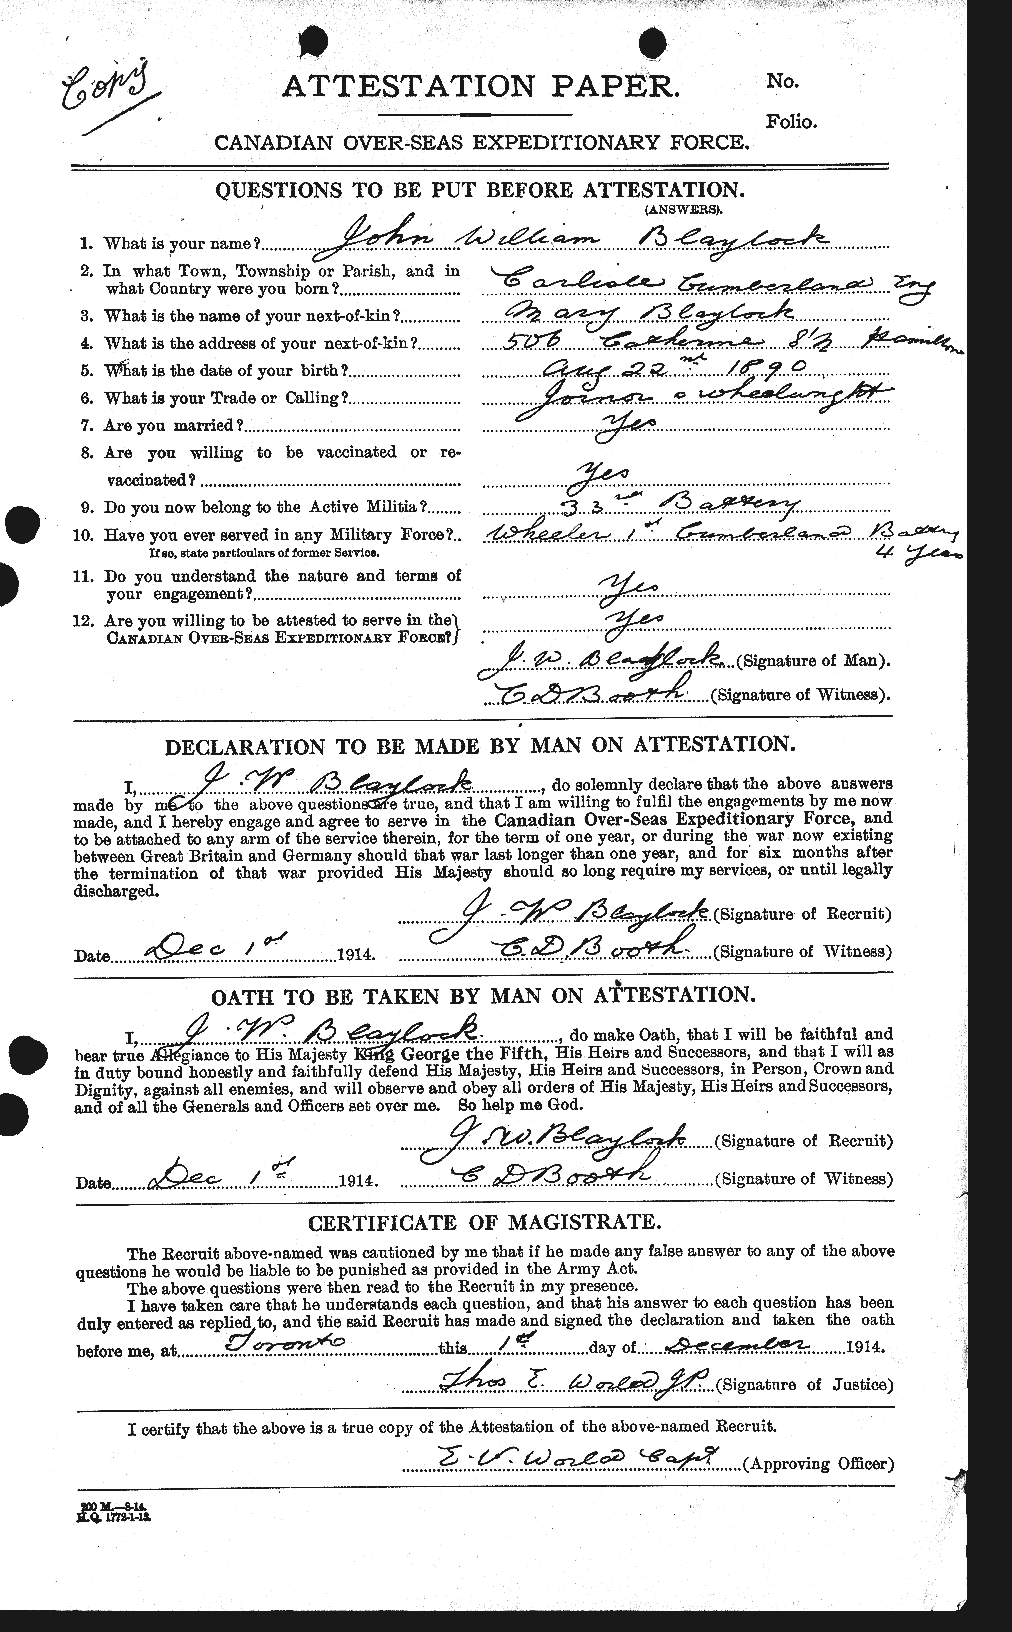 Personnel Records of the First World War - CEF 247855a